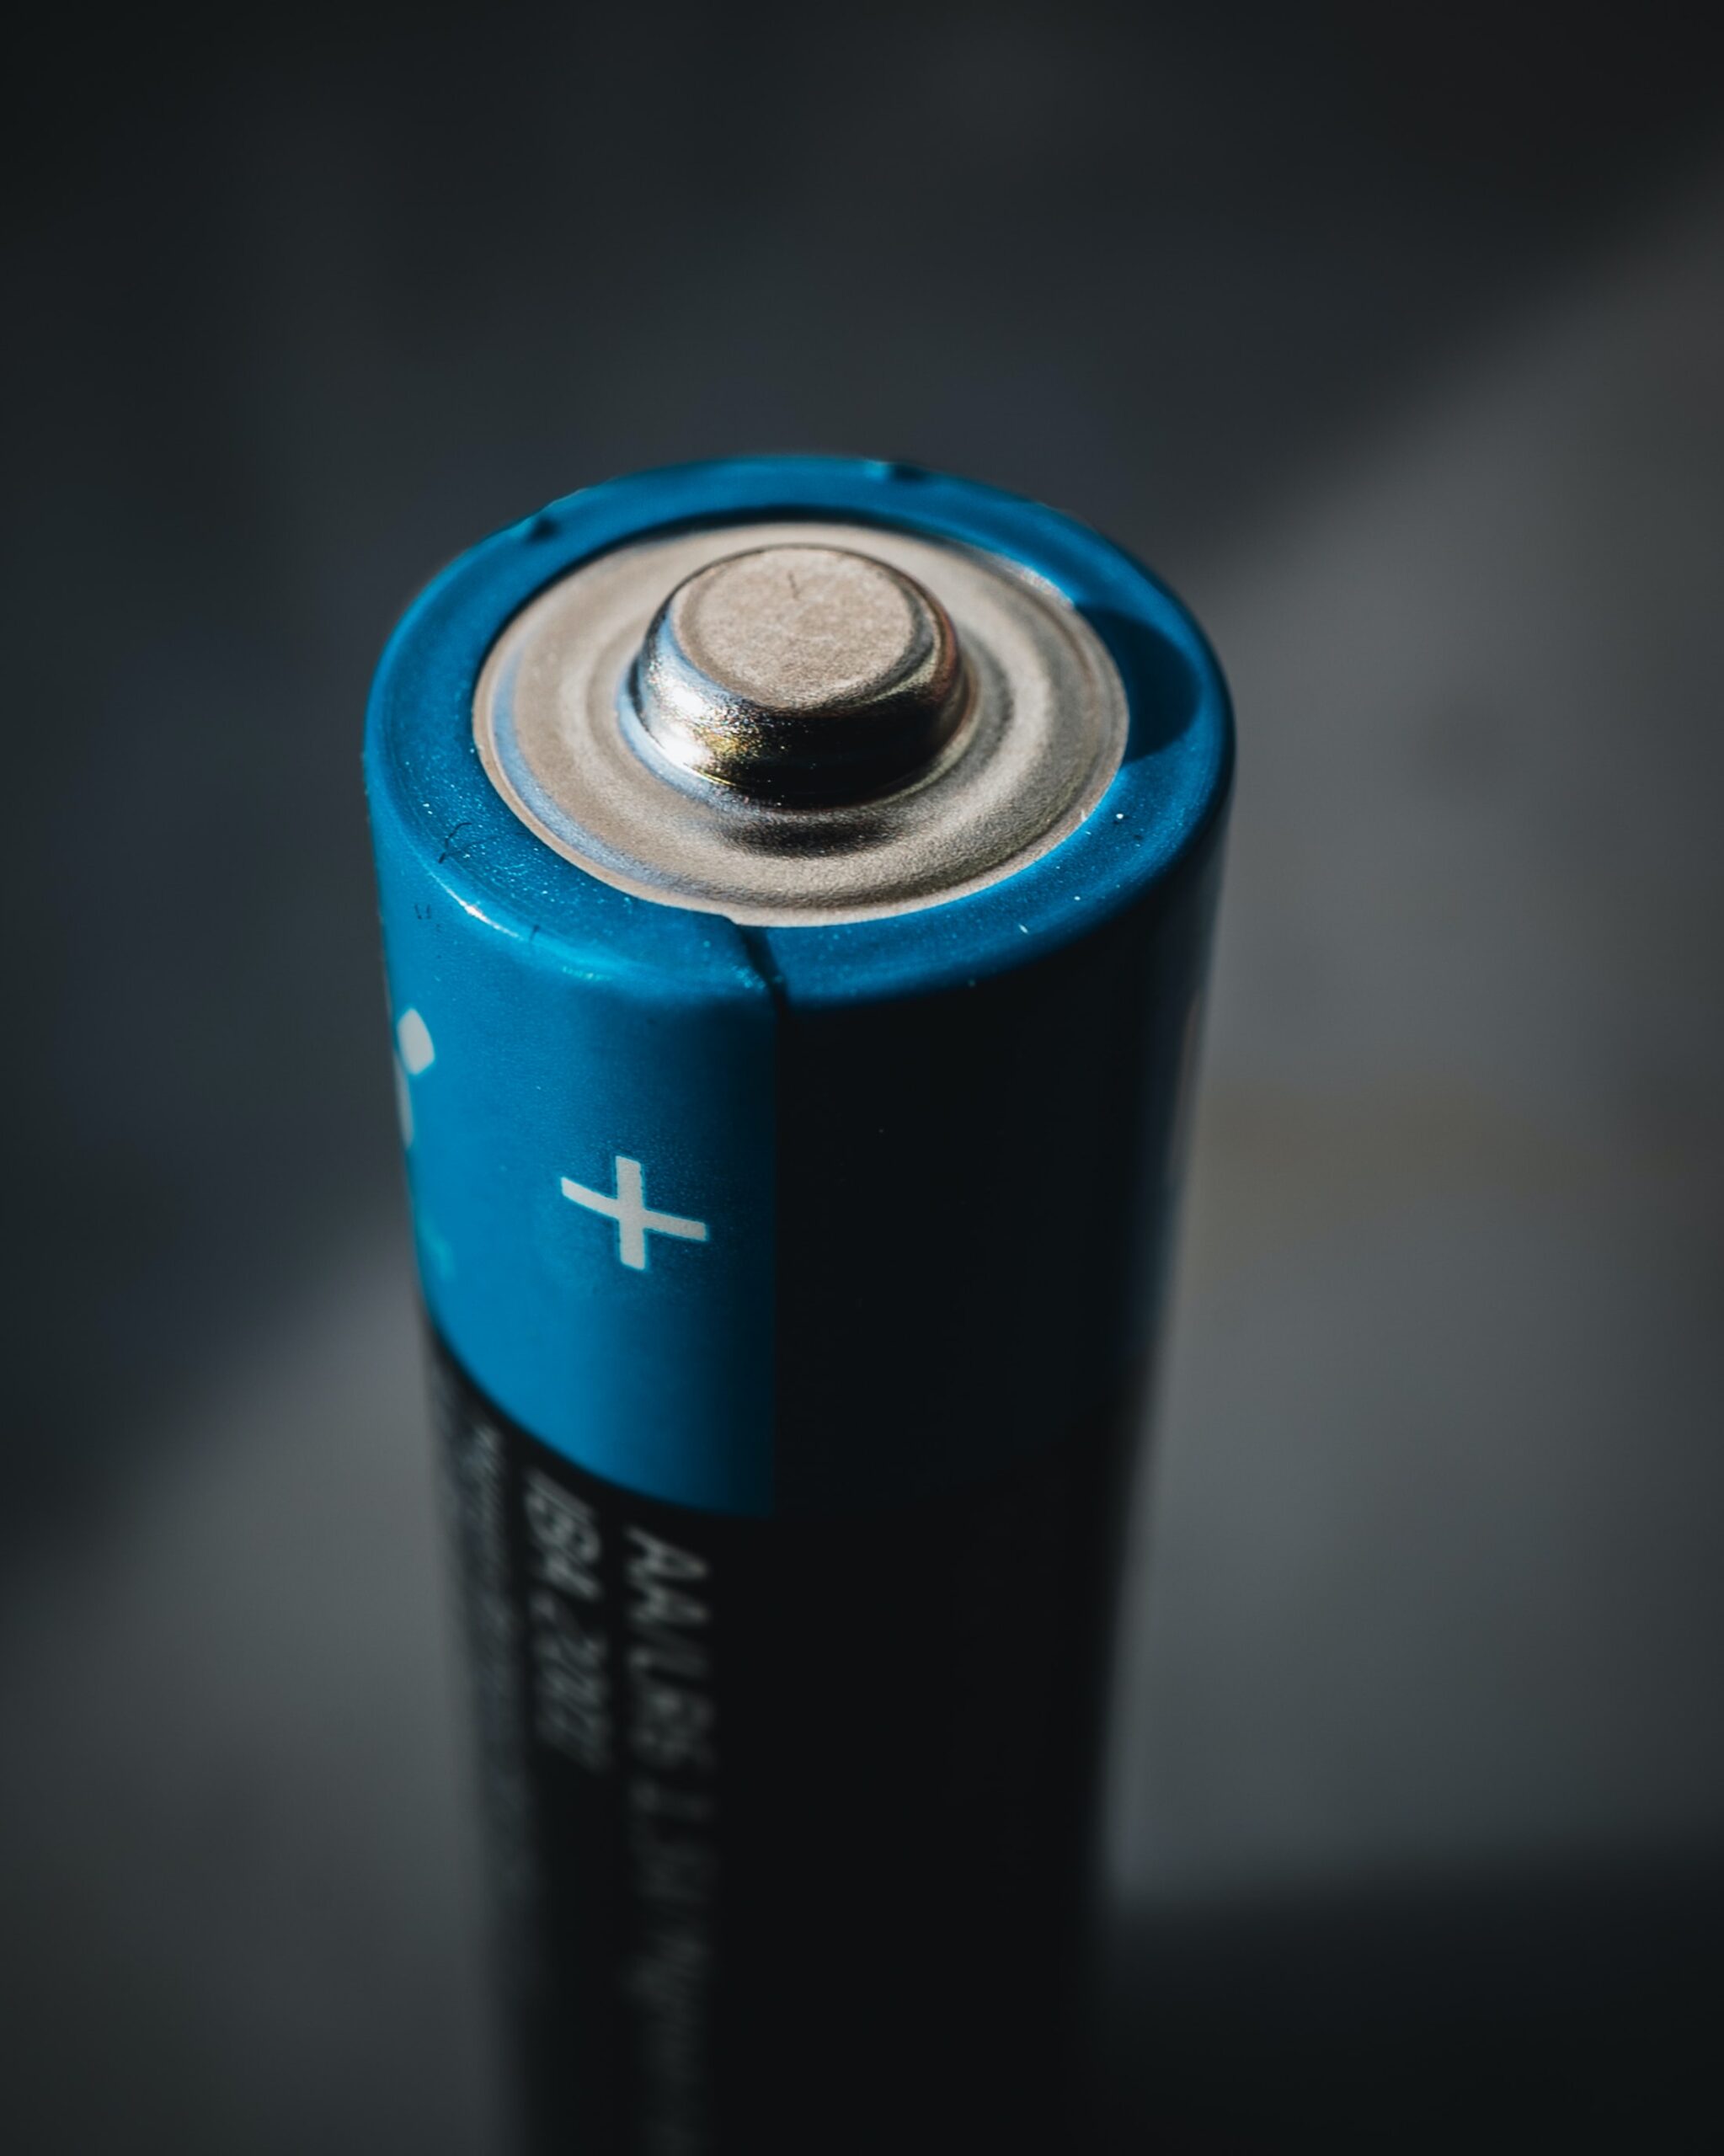 You Want To Know The Difference Between Lead Acid And Alkaline Batteries?